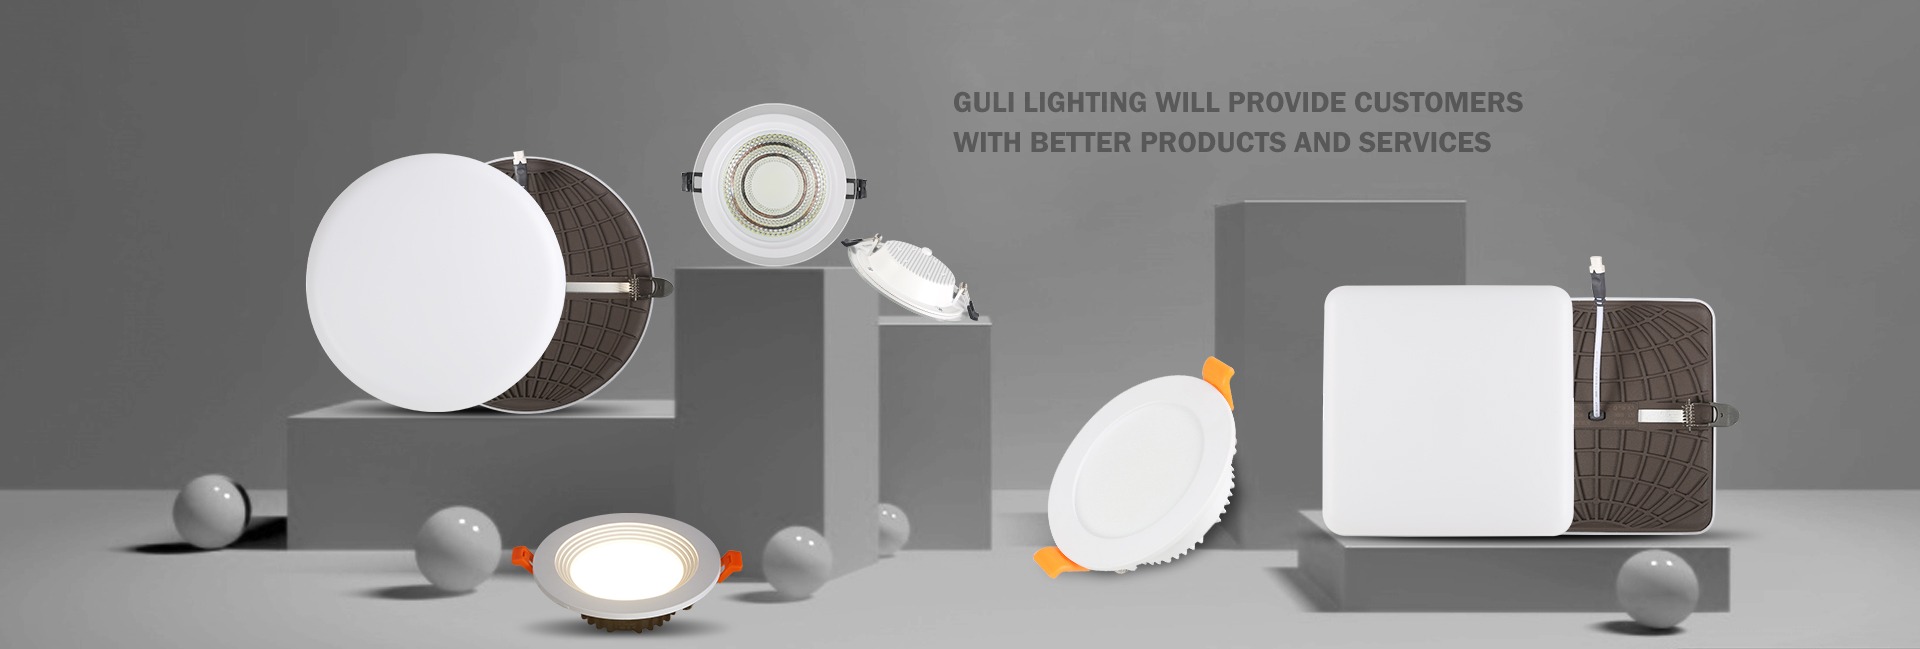 Culi Lighting Will provide Customers With Better products and services light guli light